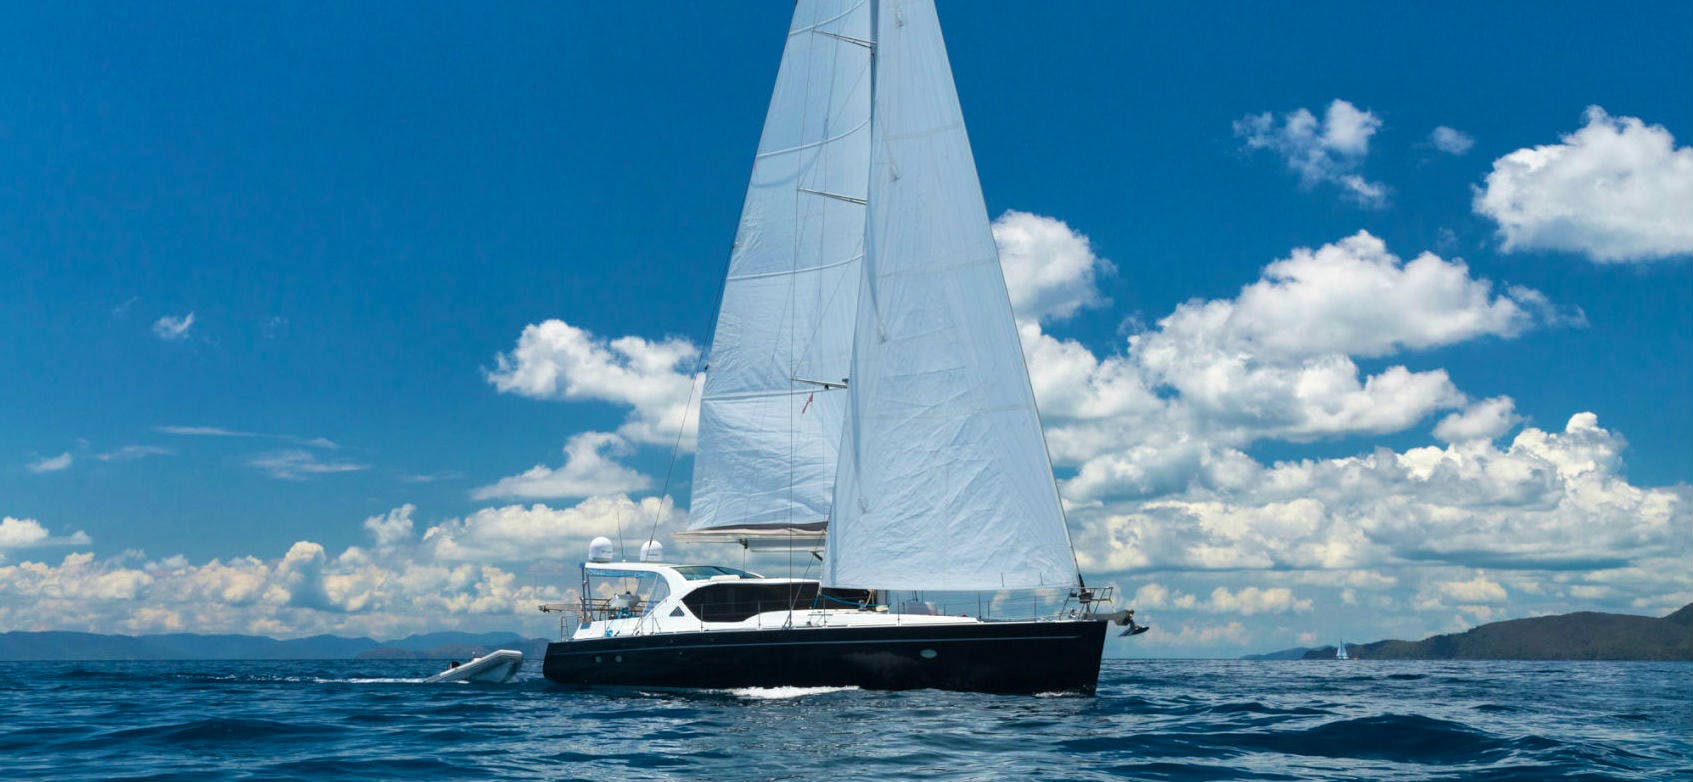 Seasonal Rates for BLISS Private Luxury Yacht For Charter